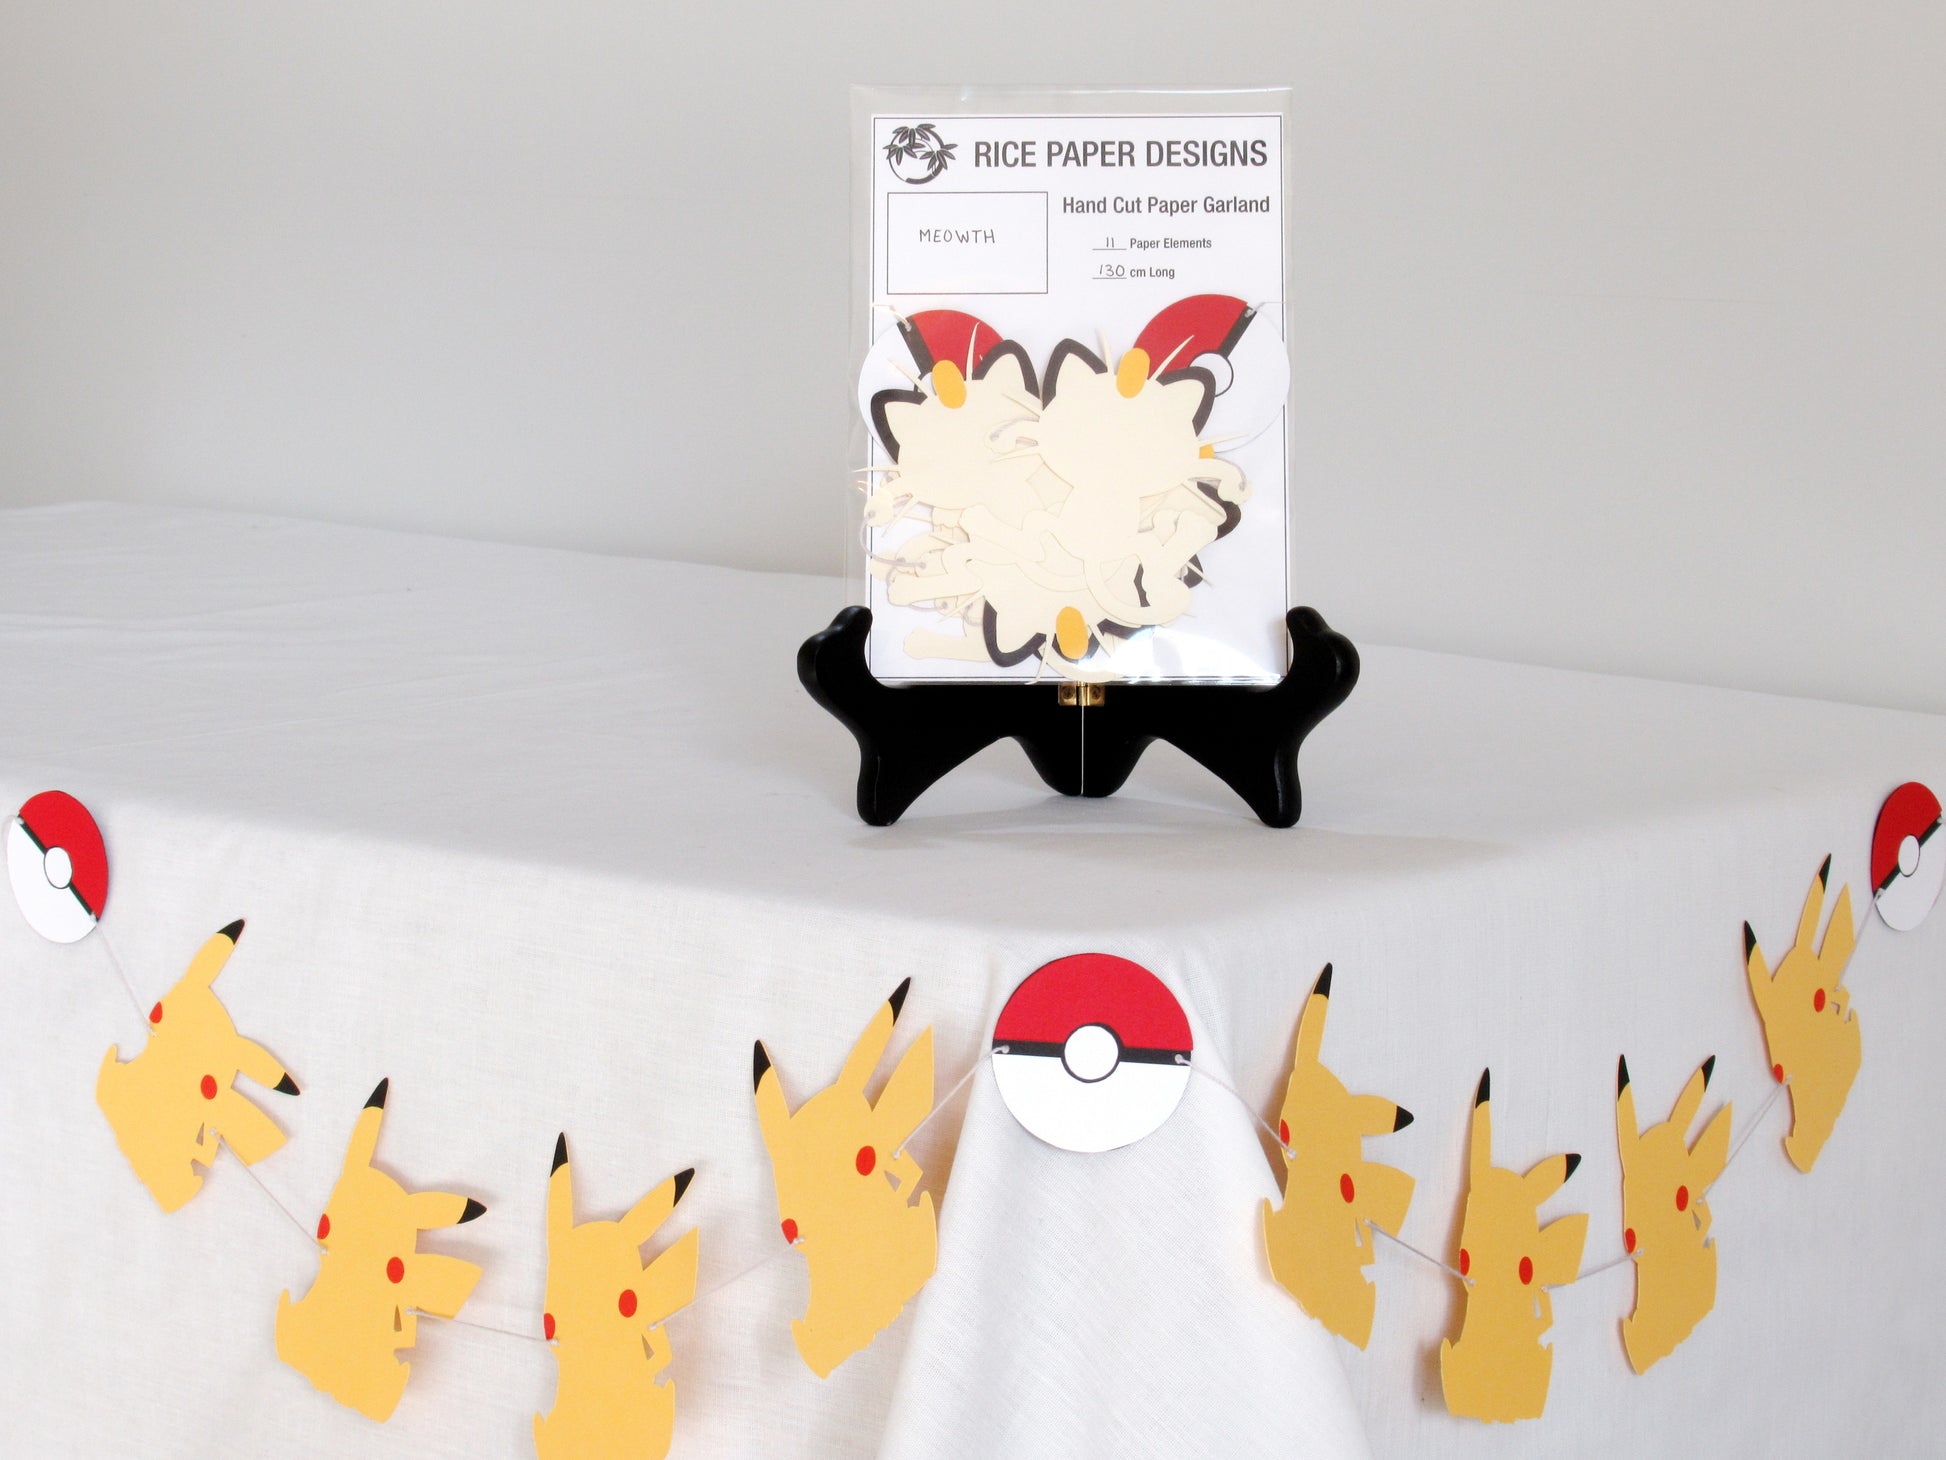 A garland with a series of paper meowths and pokeballs arranged in neat bundle inside a clear bag. There is a paper behind them showing the Rice Paper Designs logo, and information about the garland. The bag is on a table, and below it is a sample garland with pikachu hung up.